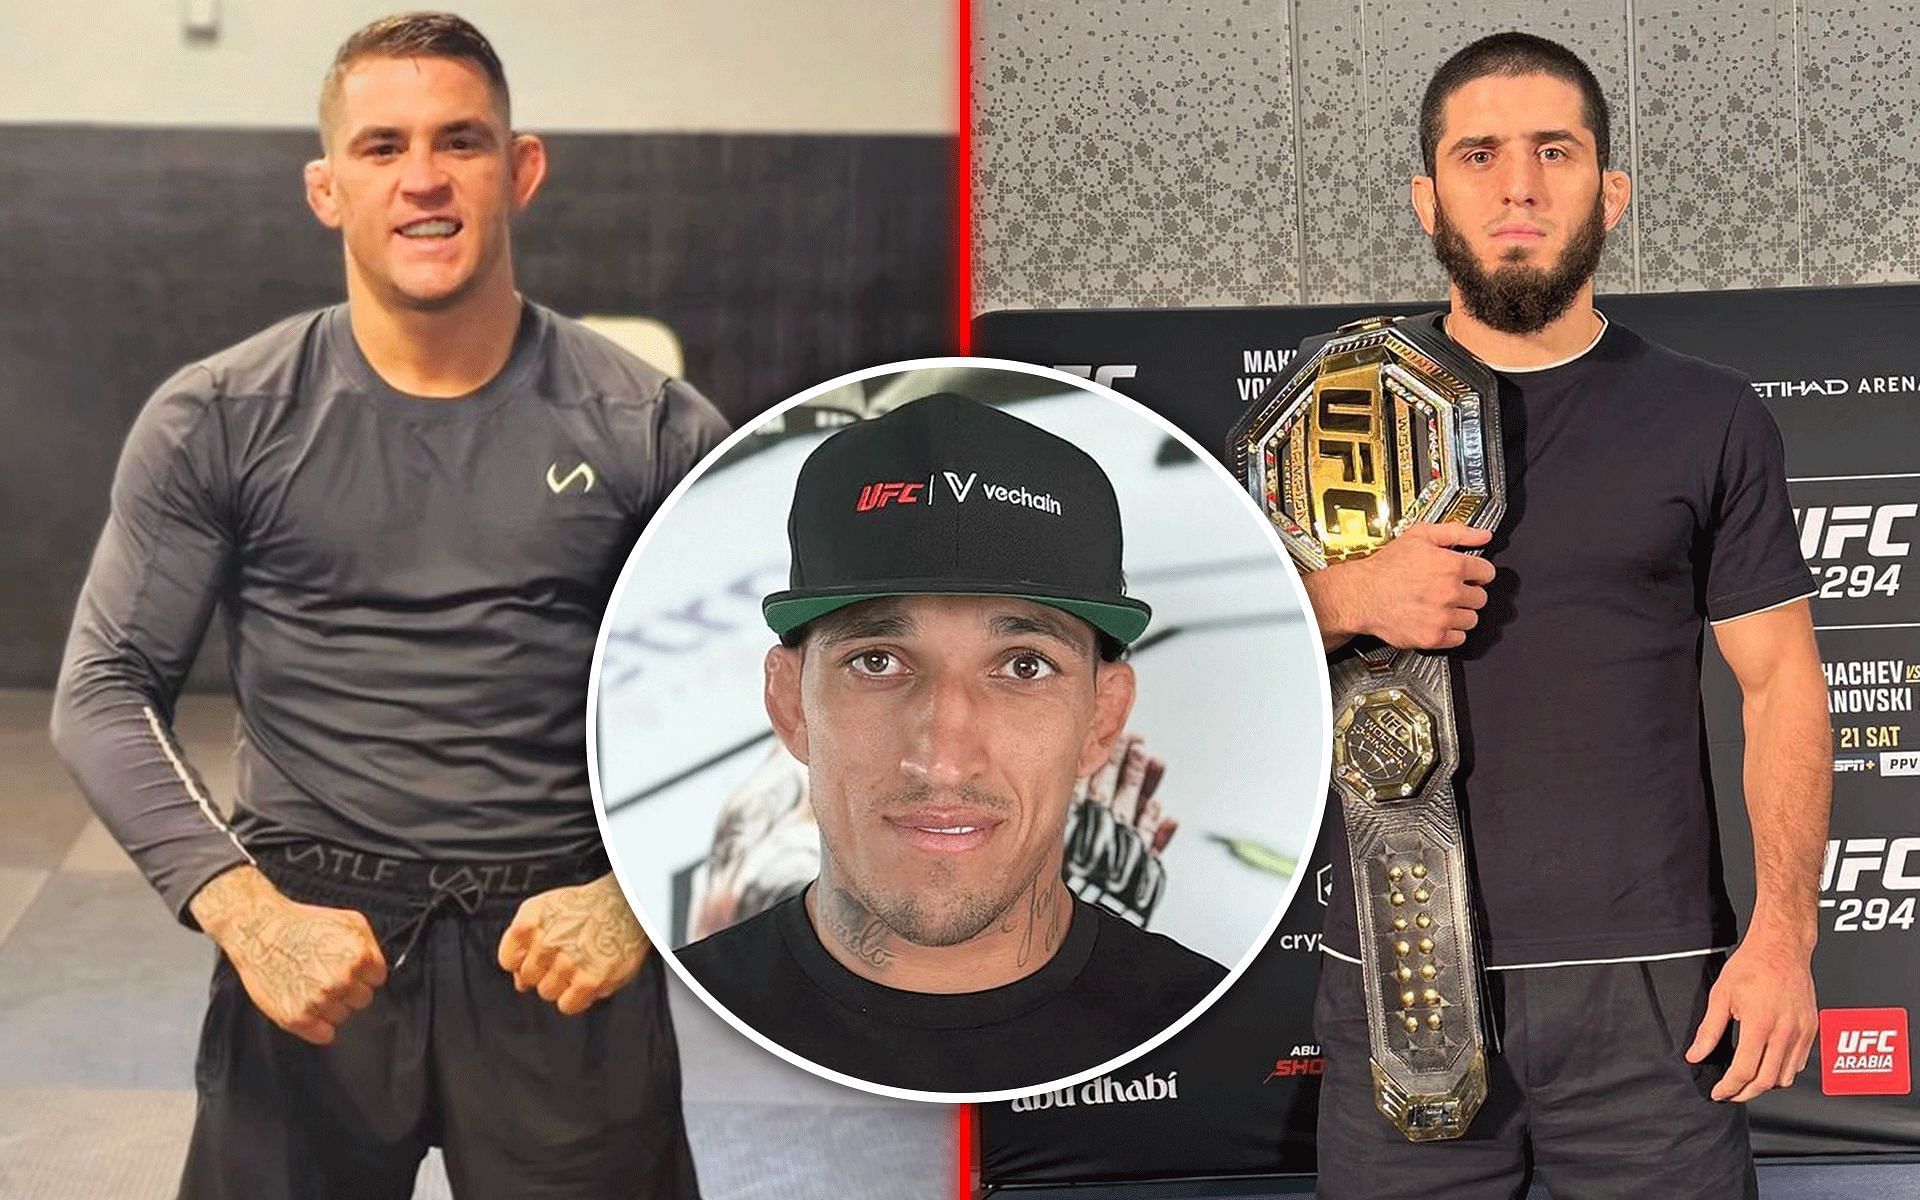 Charles Oliveira shares his opinion on the ongoing talks about a potential Islam Makhachev vs Dustin Poirier fight. [Image courtesy: @charlesdobronxs, @dustinpoirier, @islam_makhachev via Instagram]